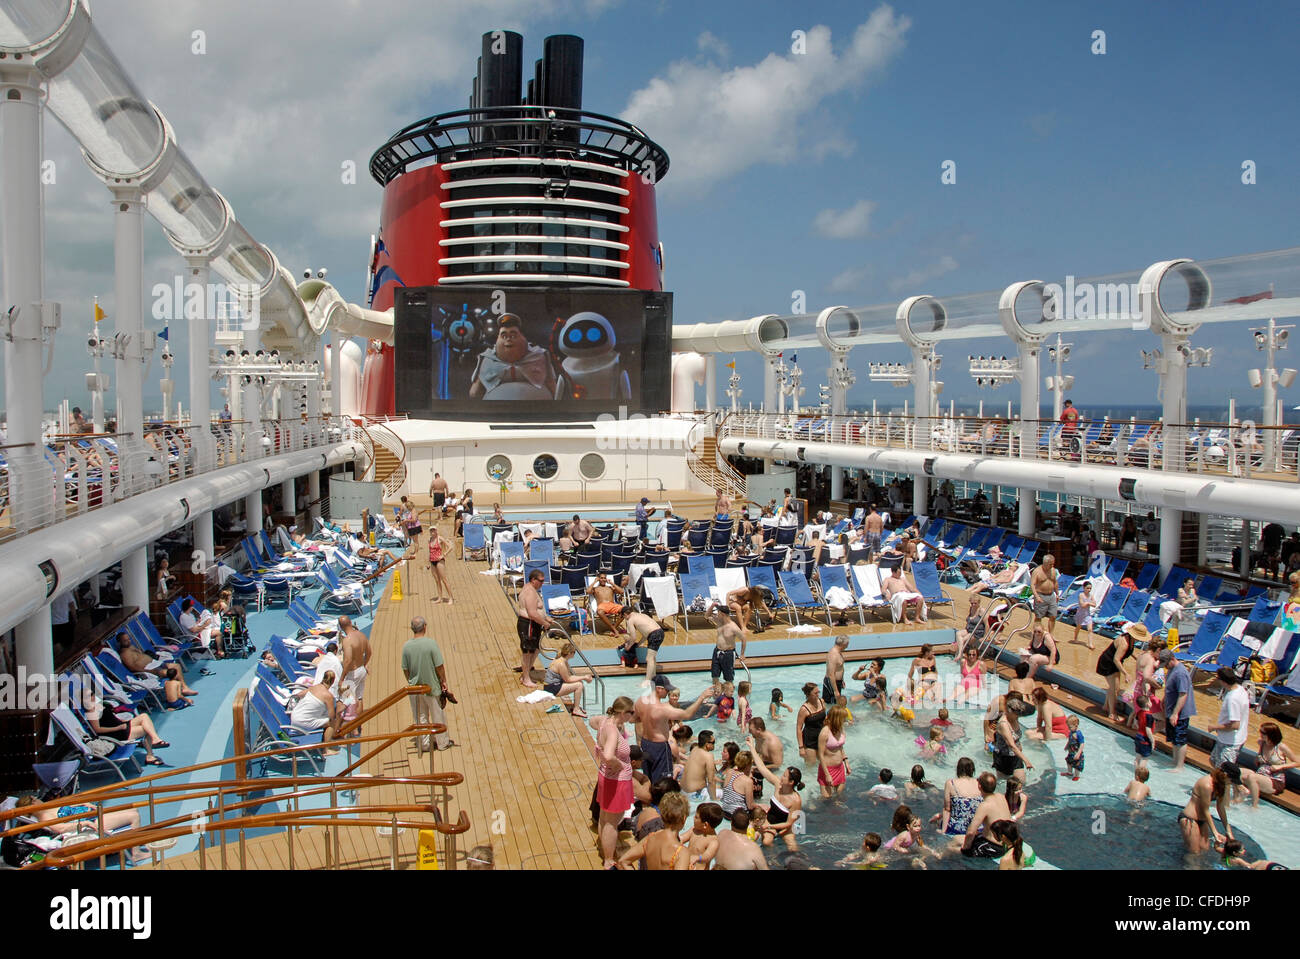 Swimming pools and outdoor theater on the Disney Cruise Line's Disney Dream Cruise Ship Stock Photo